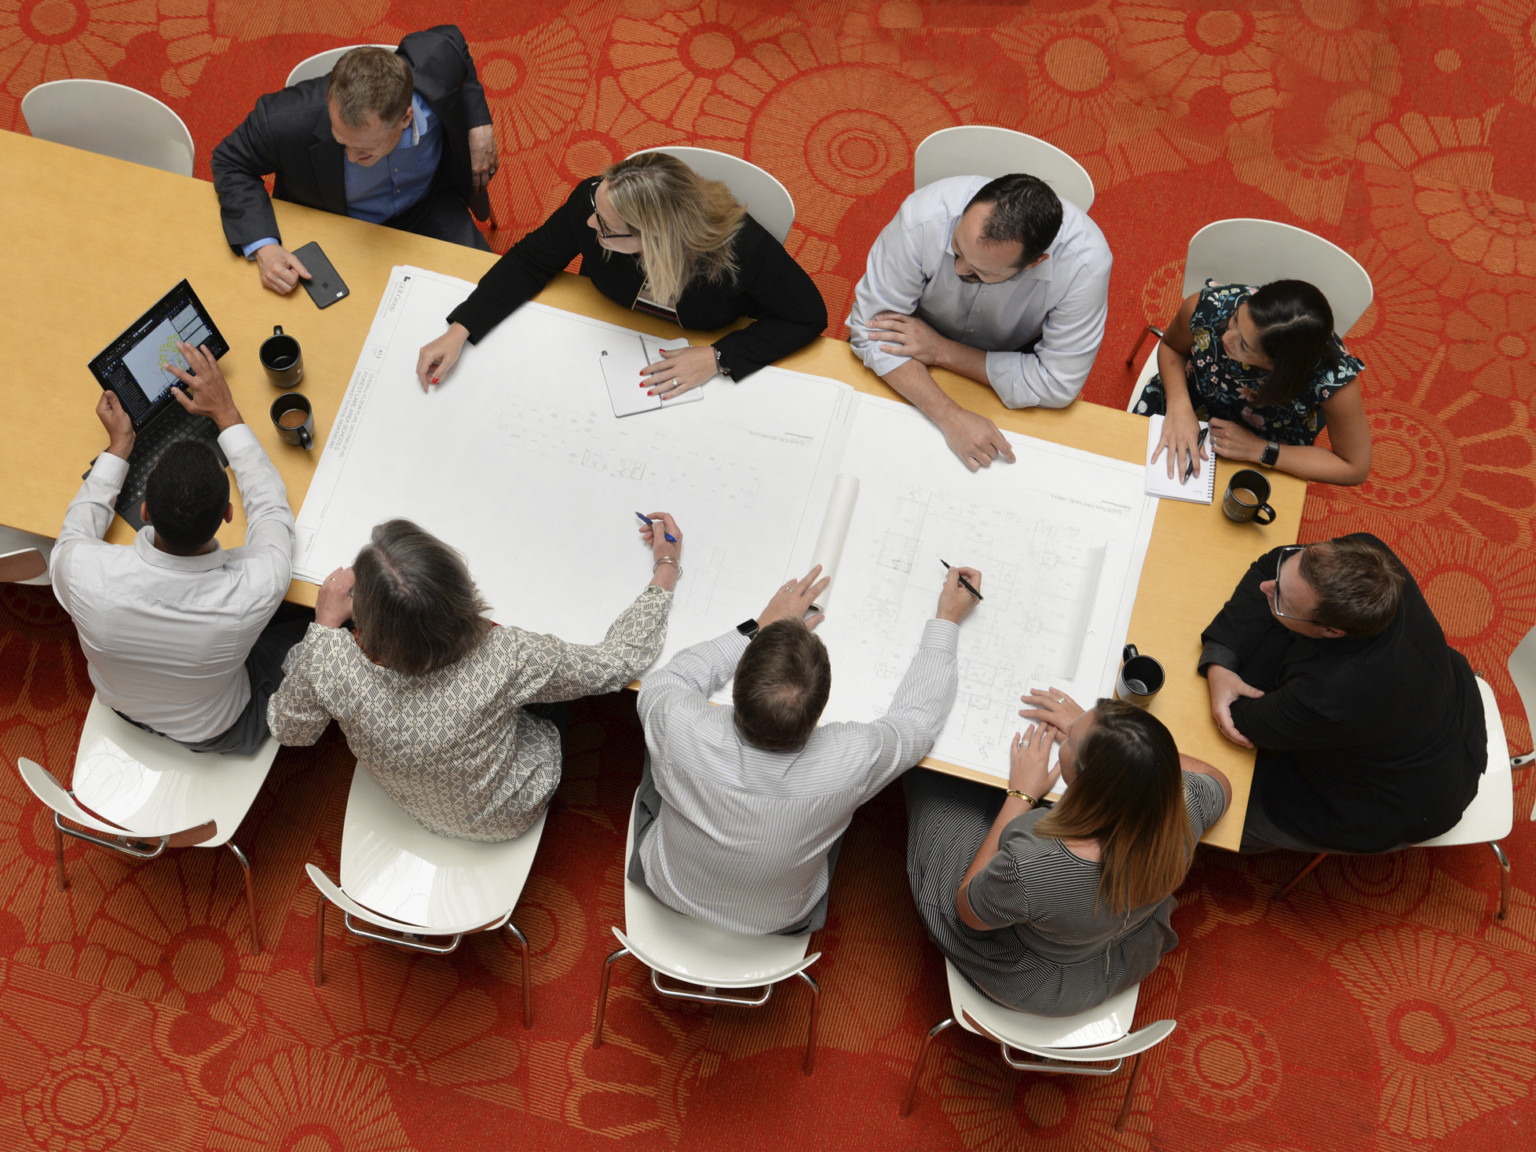 Aerial view of group working at wood conference table with grey chairs on red floral rug. White paper and tablet in use